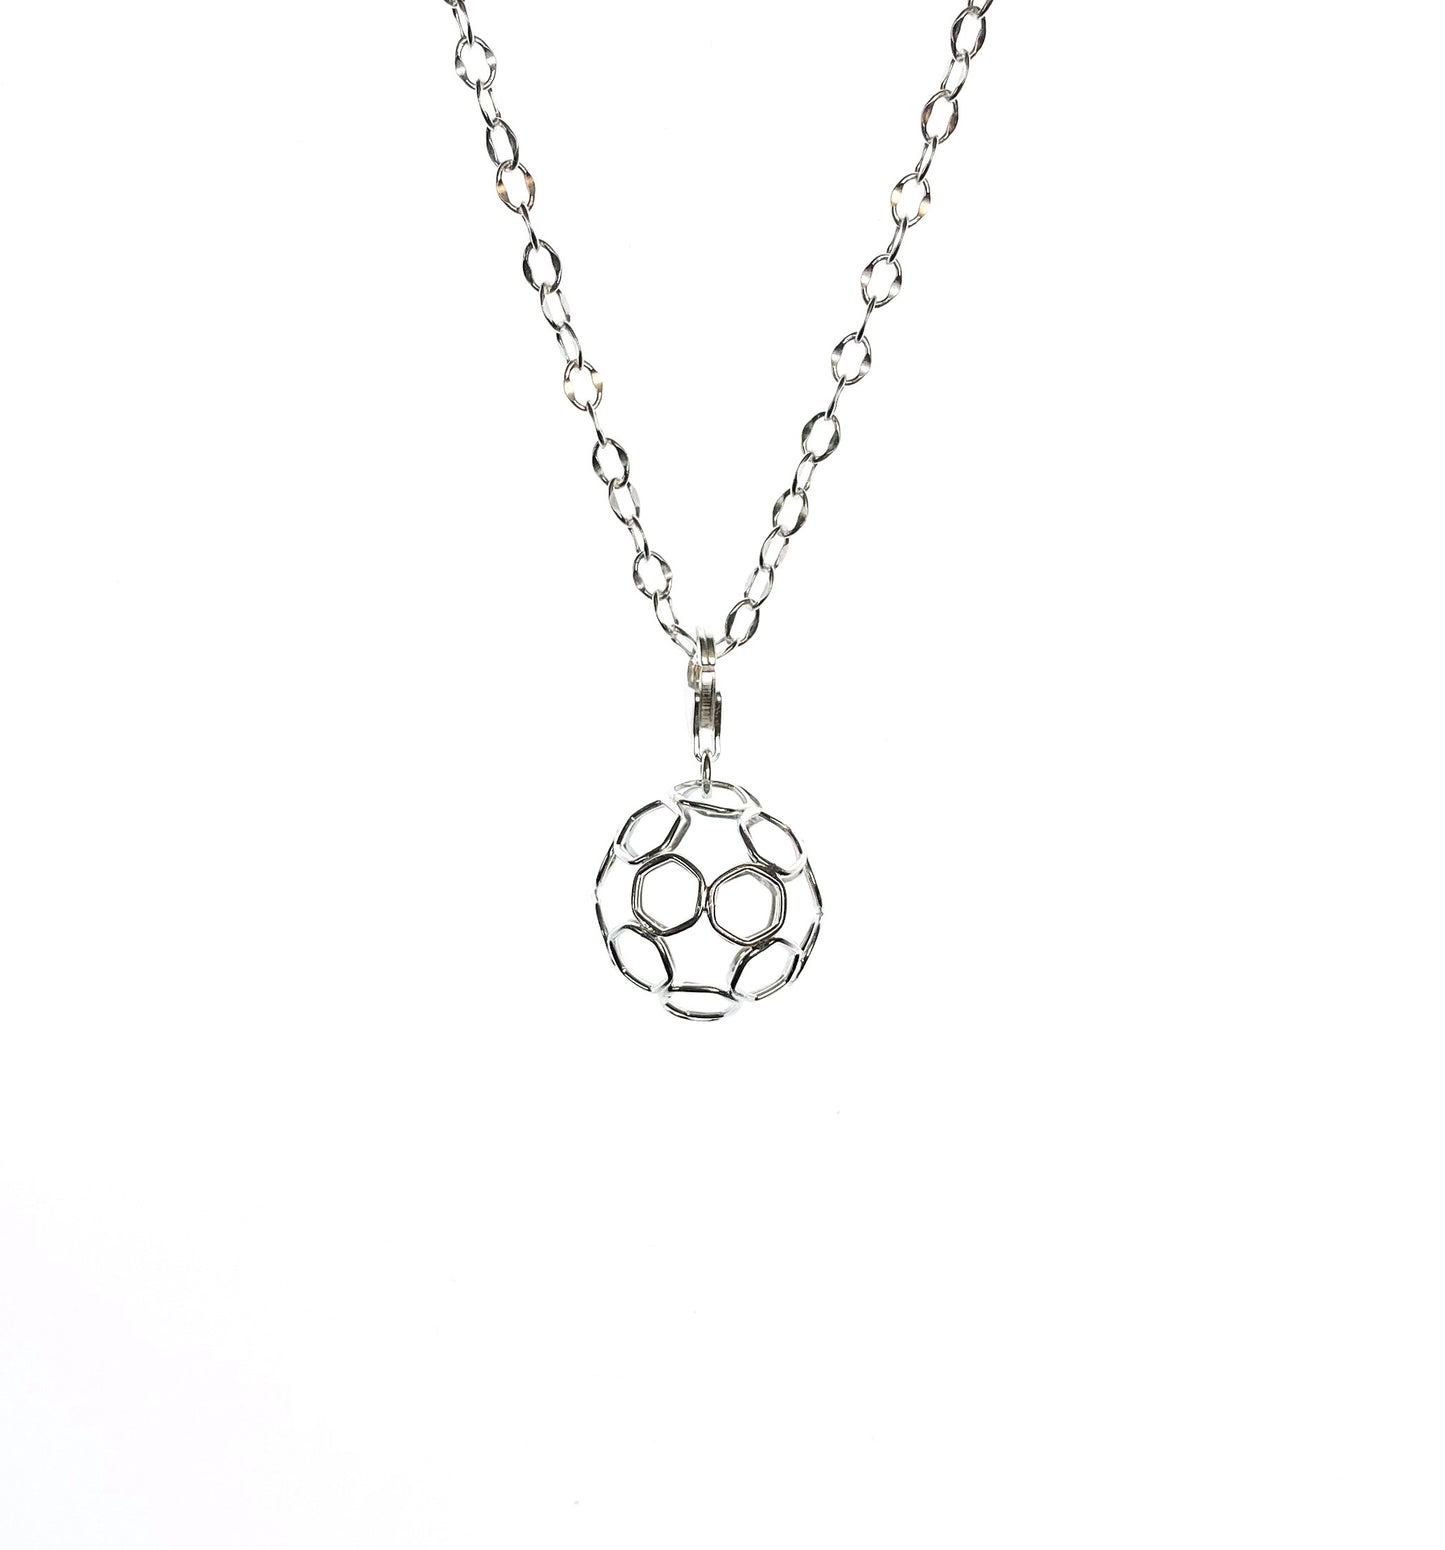 【5% OFF】Set of Large Soccer/Football Necklace (bigger chain) and Earrings